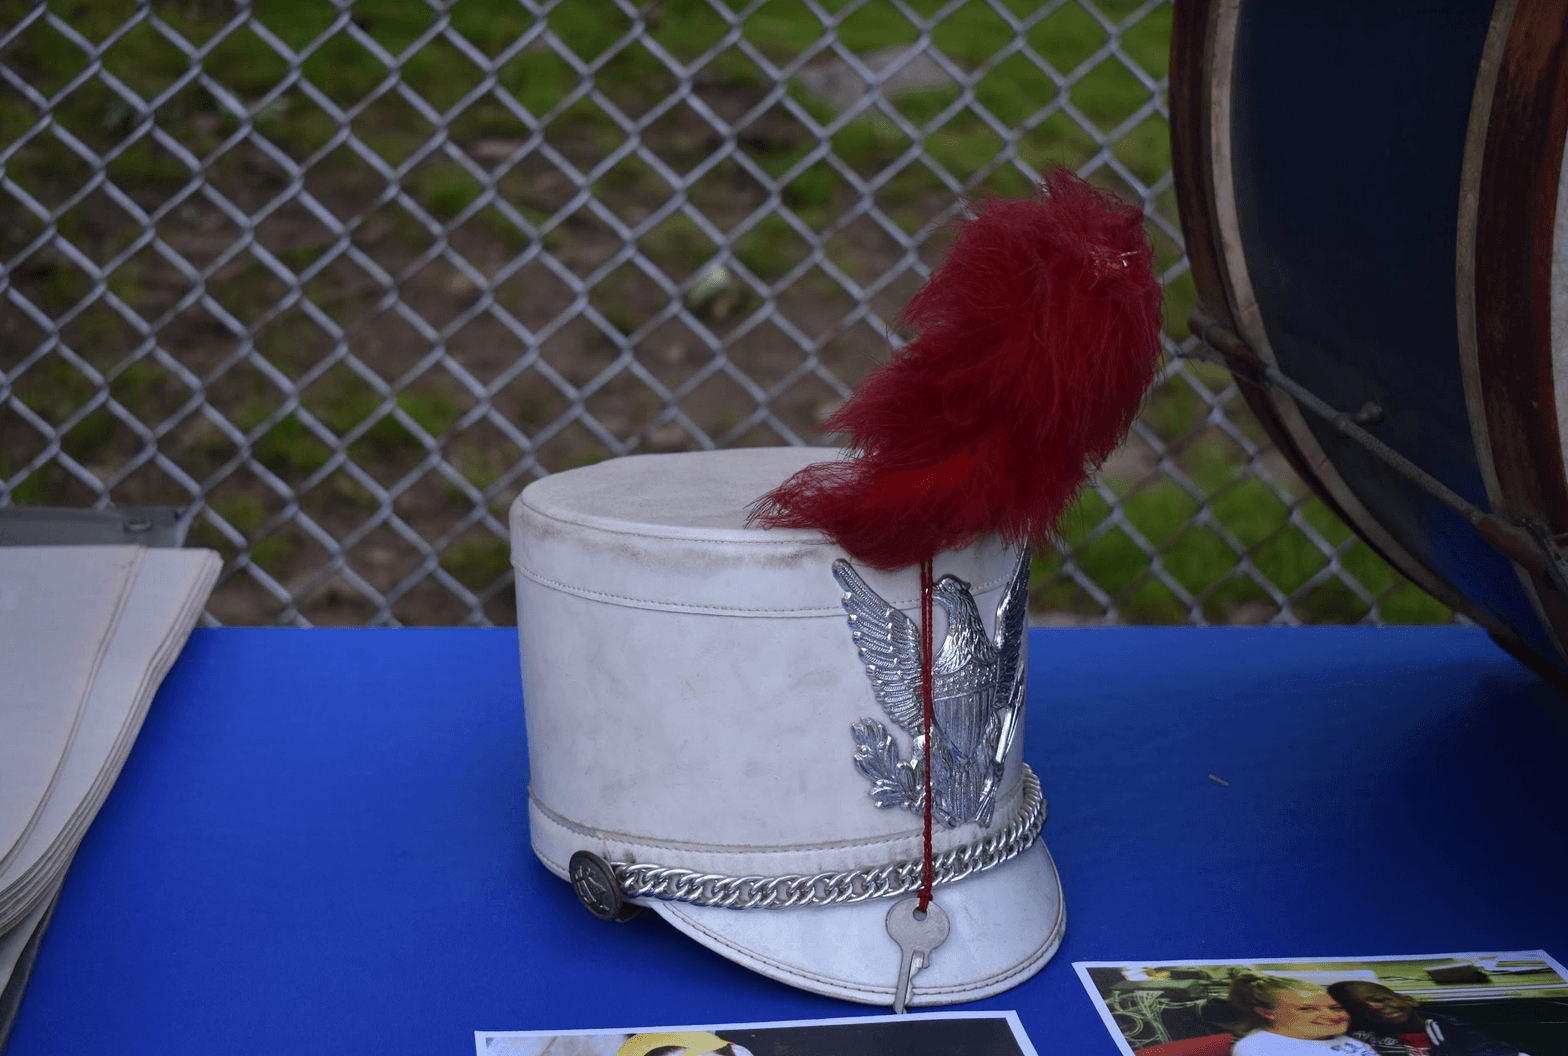 Memorabilia from the Boys Club Drum & Bugle Corps on display at Camp Simmons. June 9, 2018 Photo: Eric Harvey